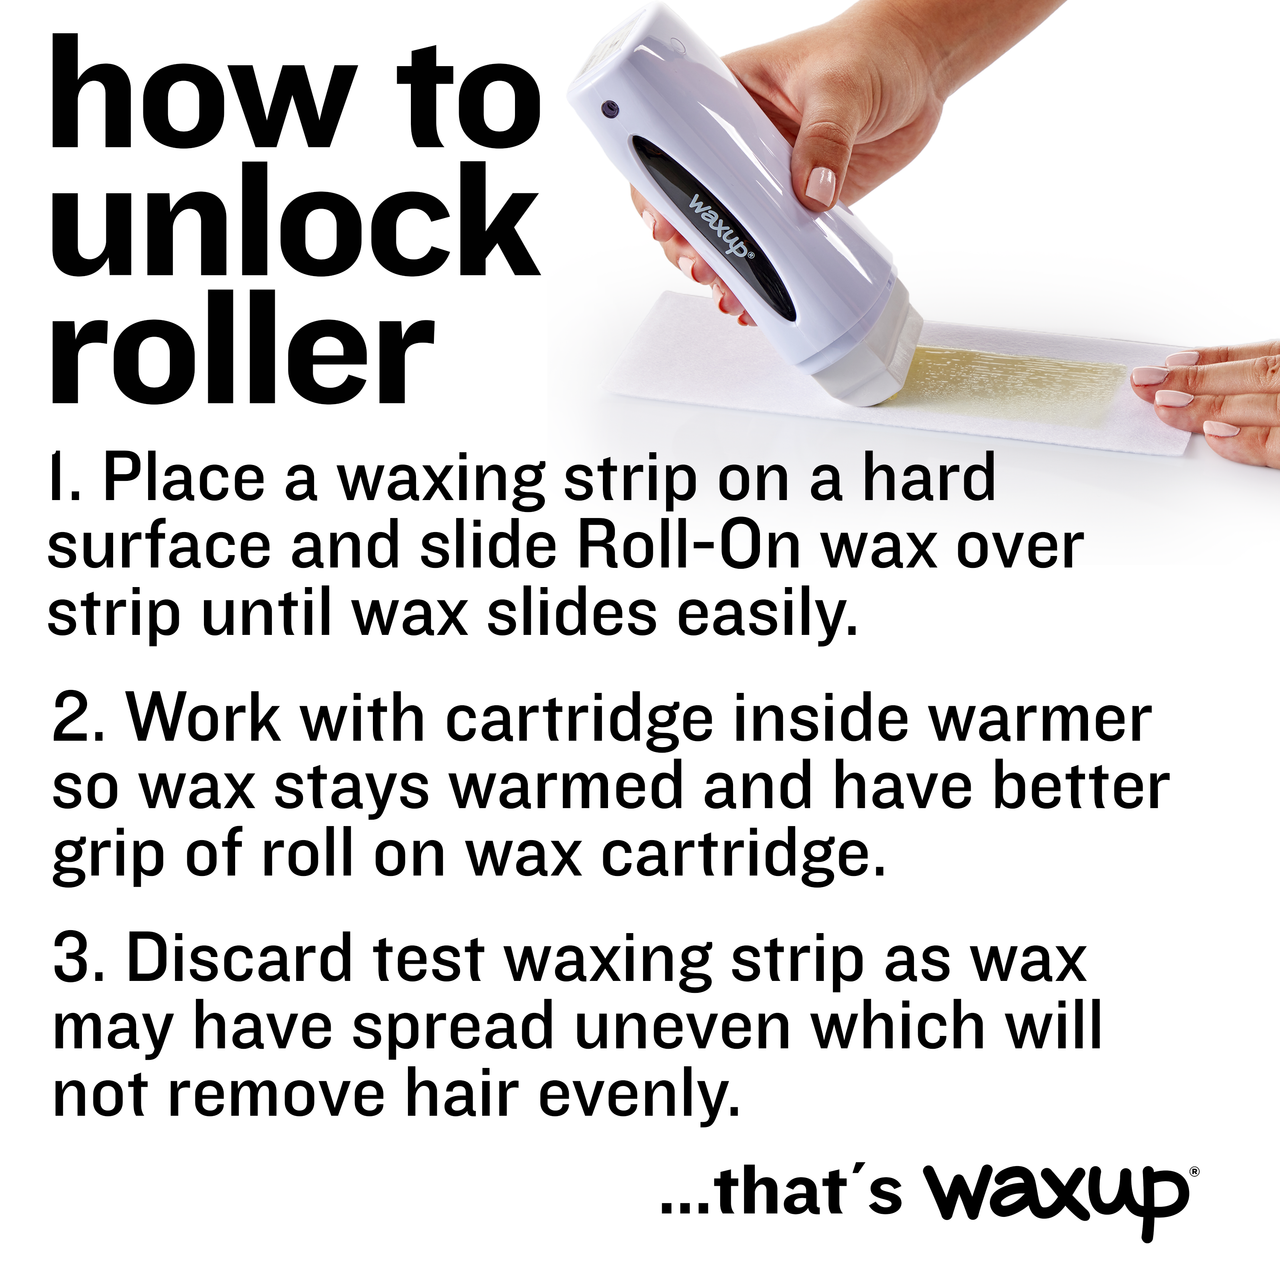 waxup Roller Waxing Kit – Best Beauty Solution